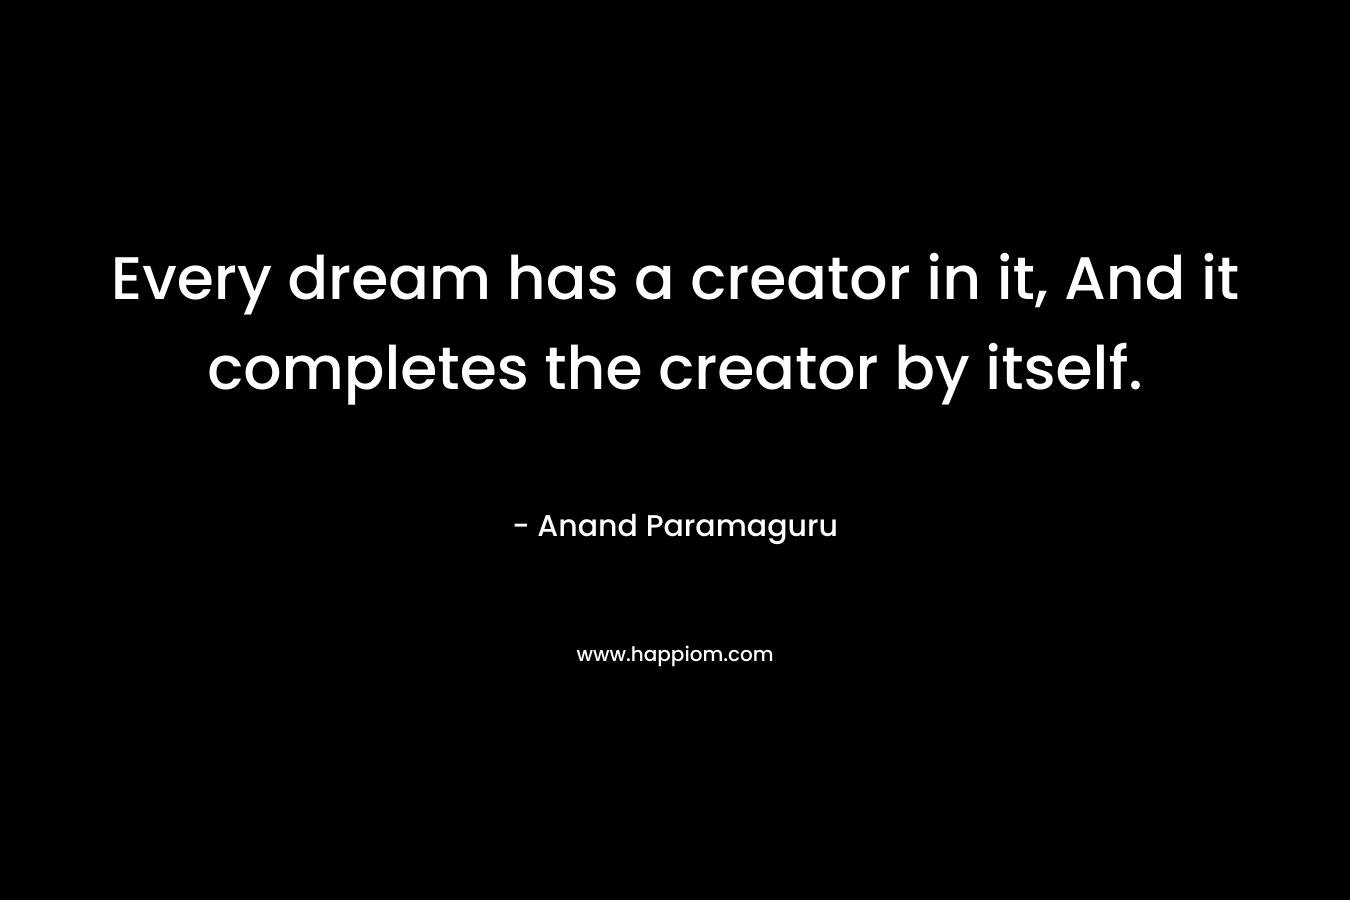 Every dream has a creator in it, And it completes the creator by itself.